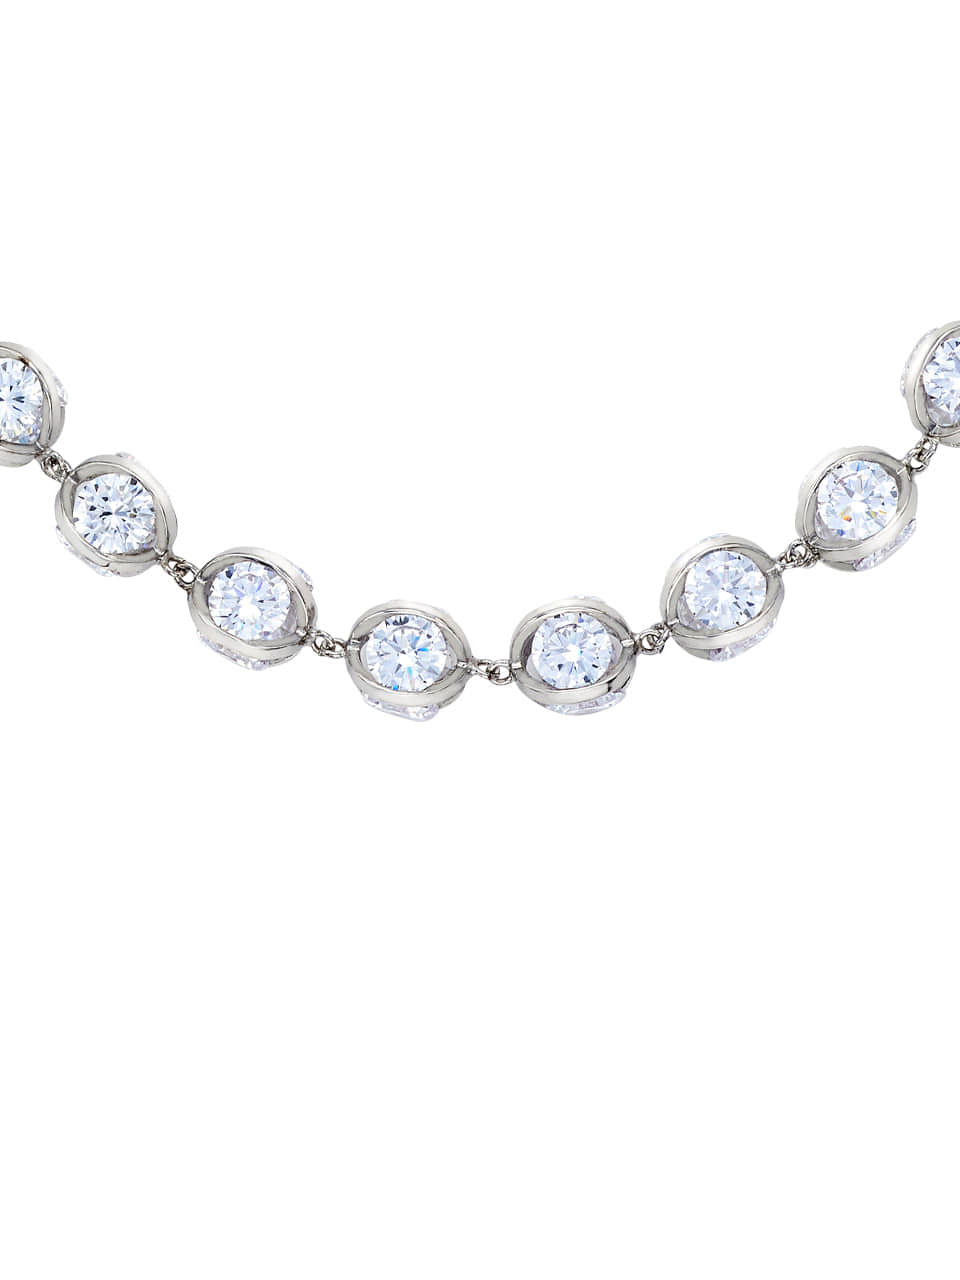 DAZZLING BALL NECKLACE